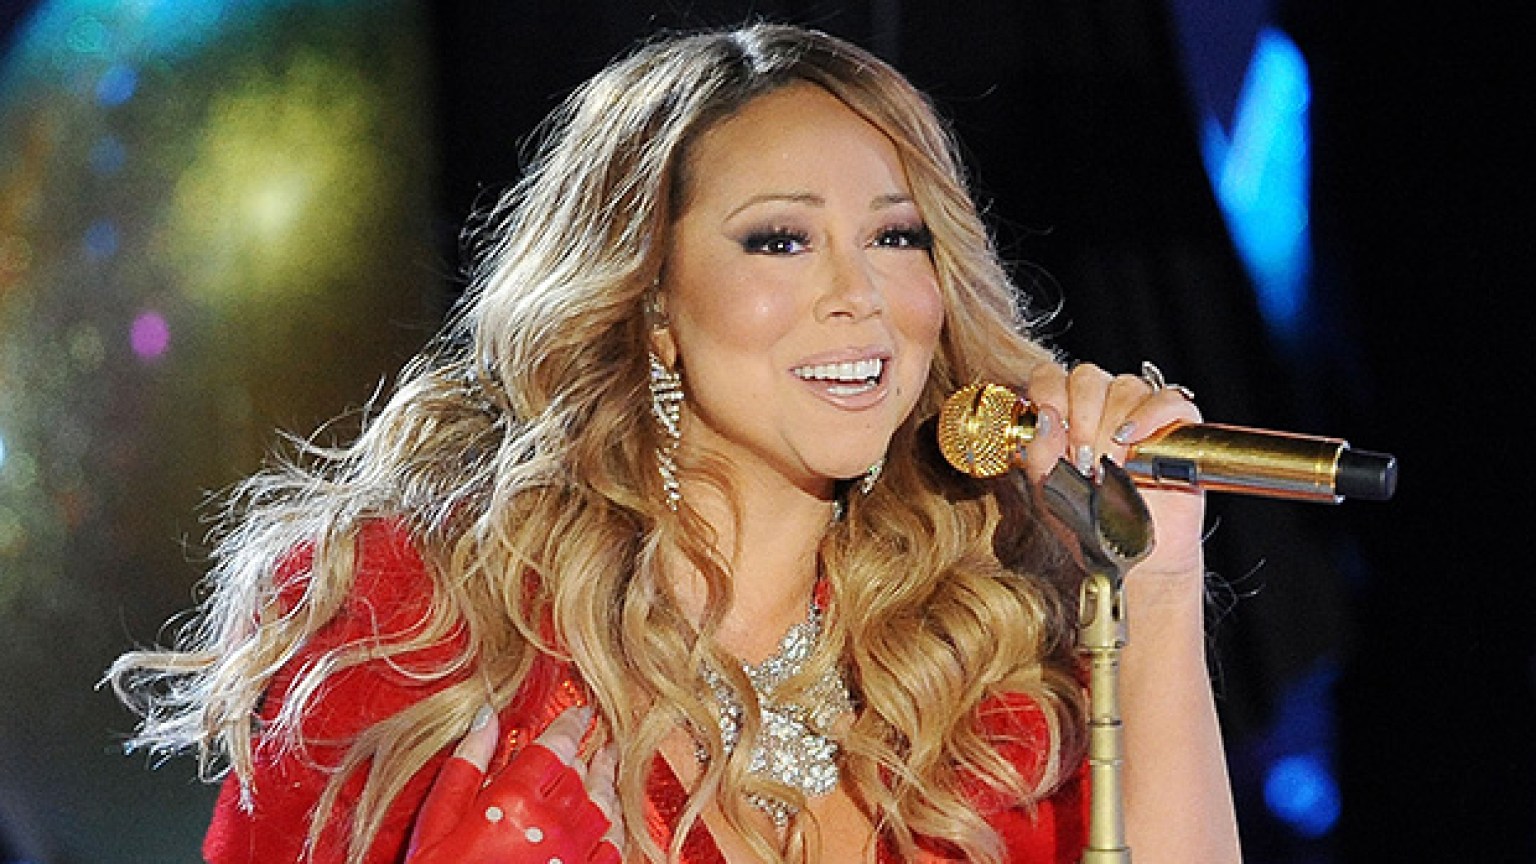 Mariah Carey Gets in Hot Tub in Sparkling Red Dress to Celebrate 2024